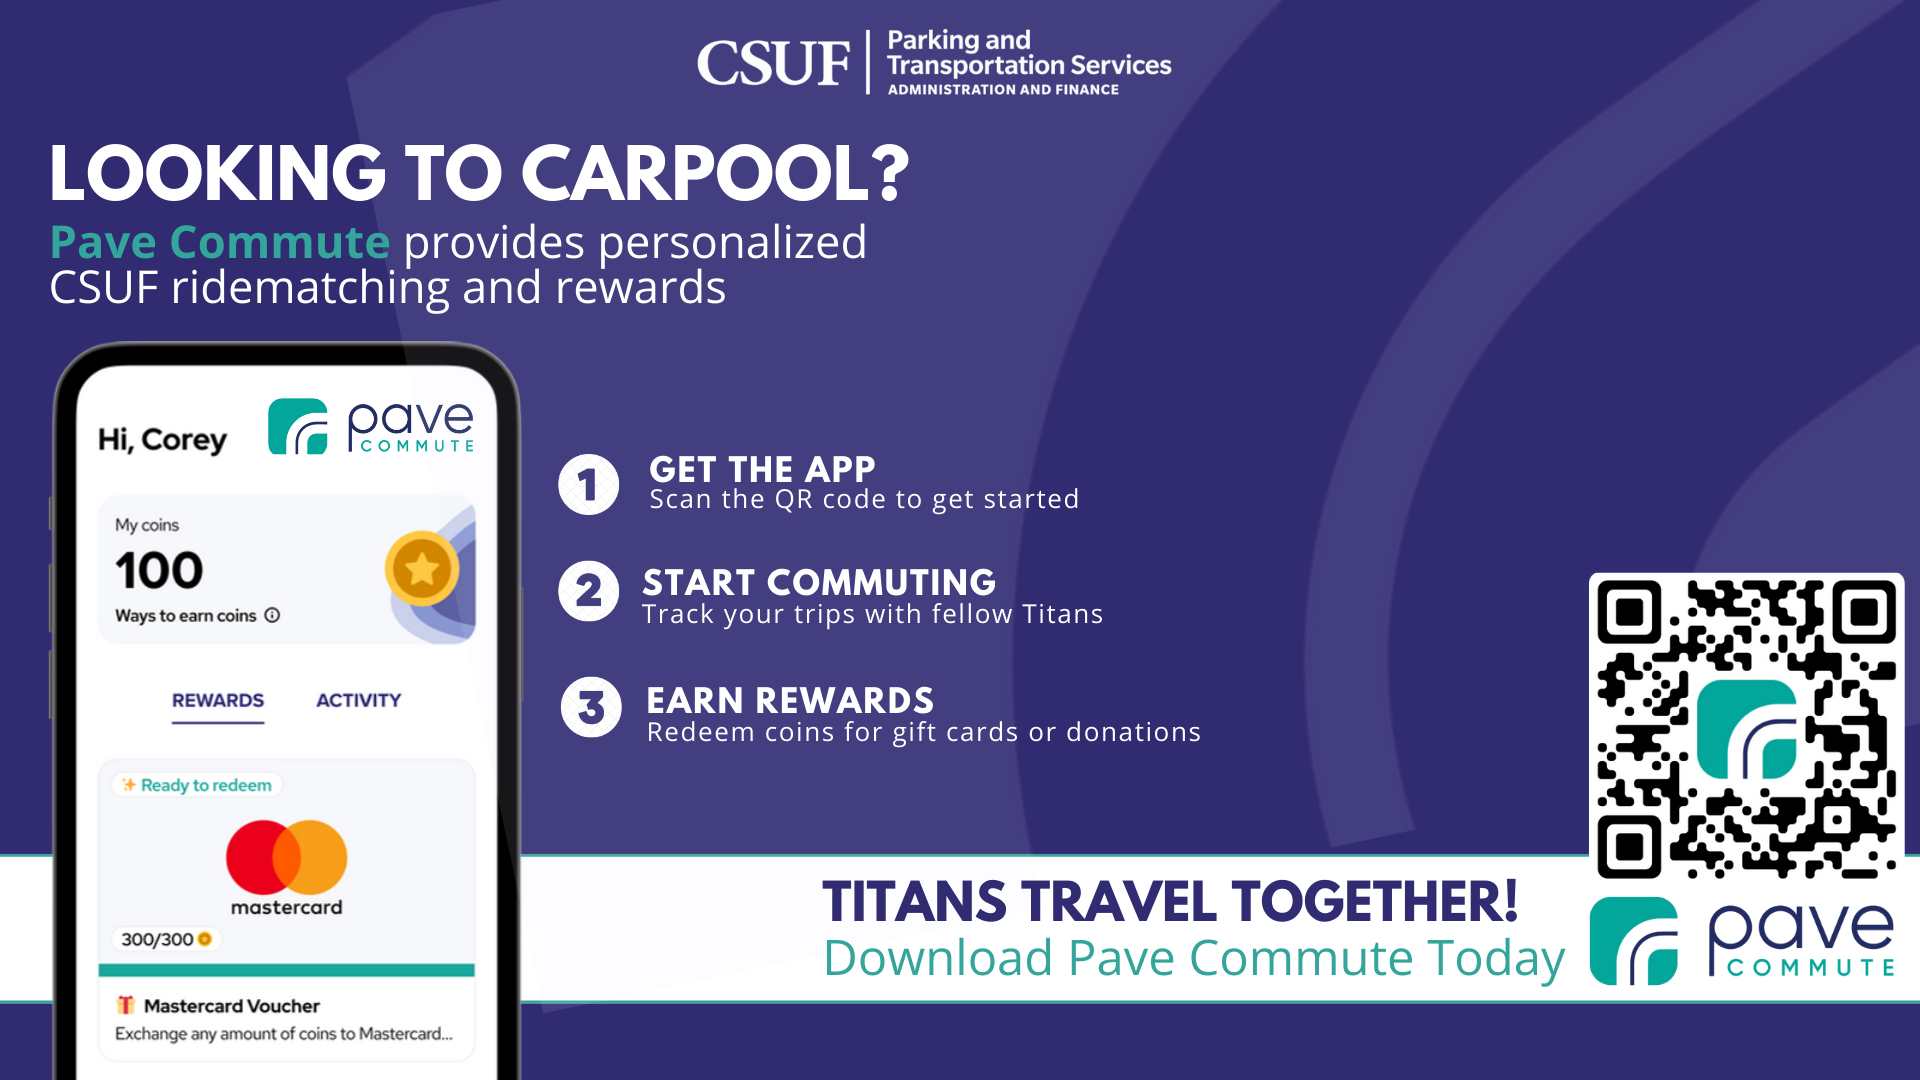 More Student Parking - Parking and Transportation Services | CSUF